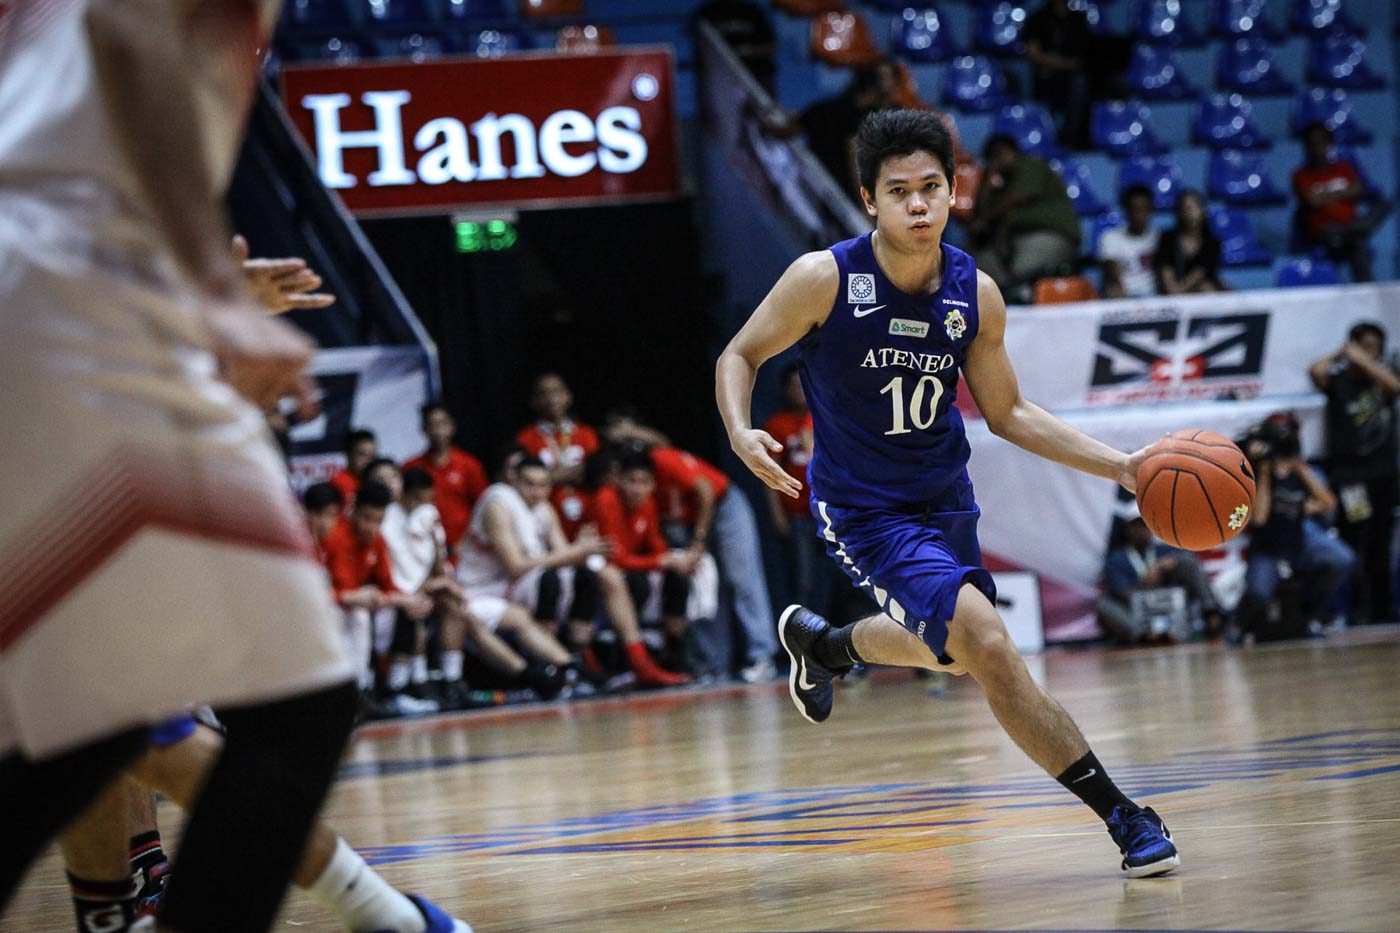 More minutes? Promising rookie Mendoza only concerned about helping Ateneo